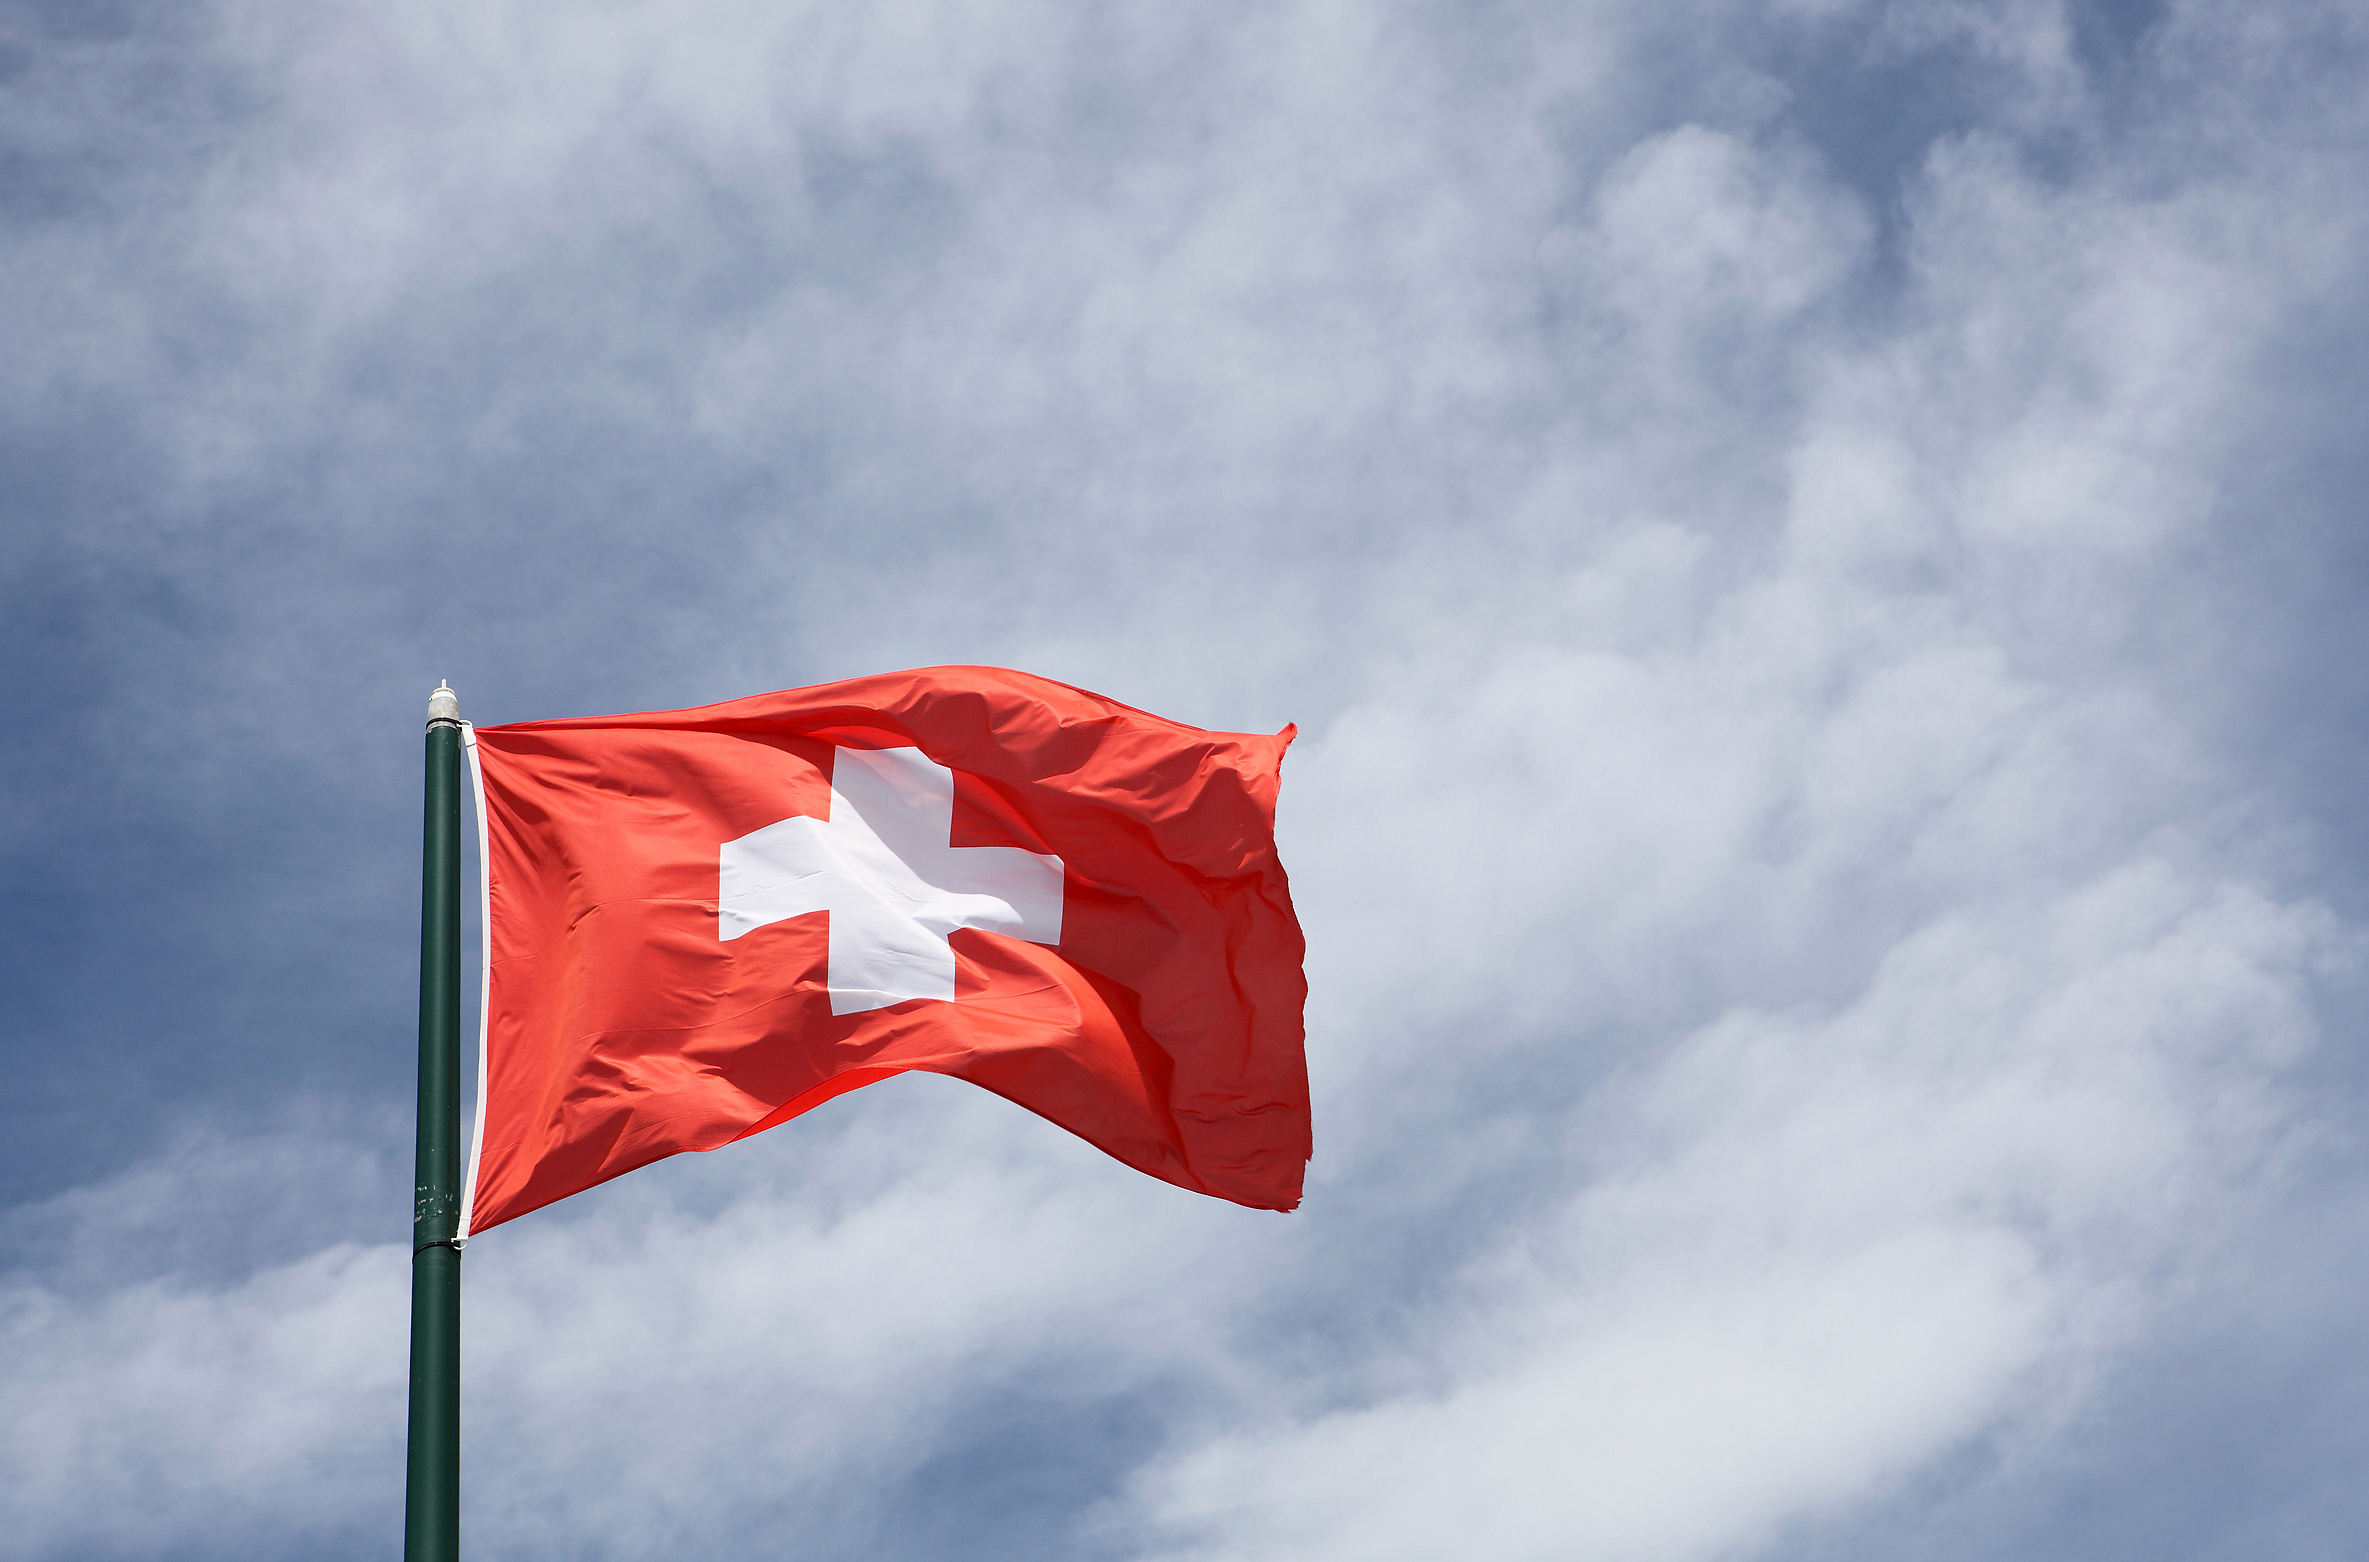 Switzerland is once again the most innovative country in the world